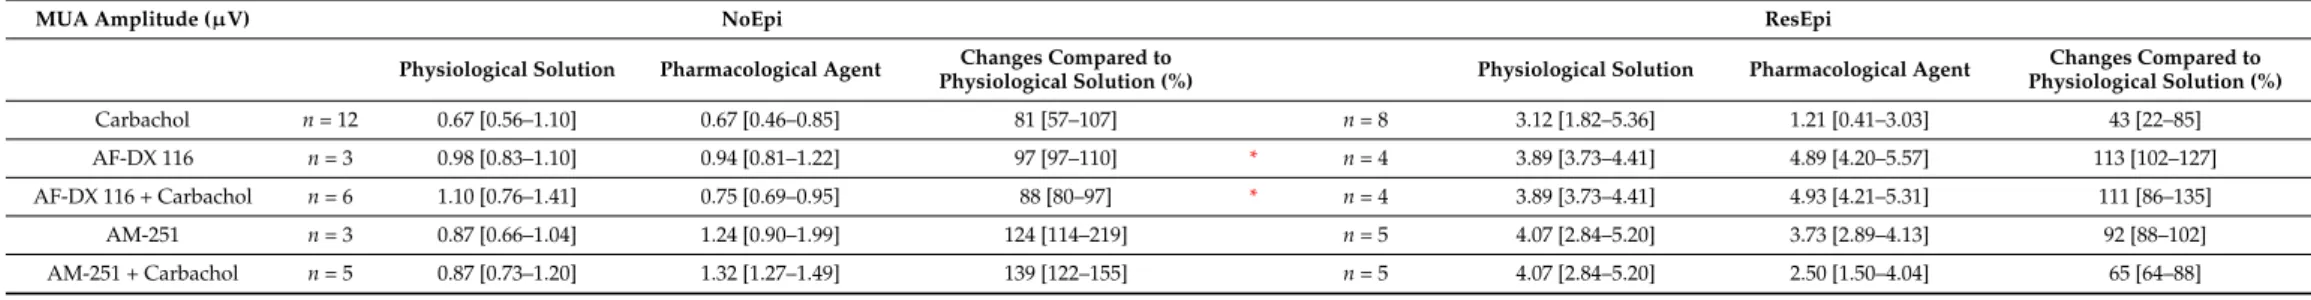 Table 5. MUA amplitude. Red asterisk: significant difference between NoEpi and ResEpi (Welch’s t-test, p &lt; 0.05)